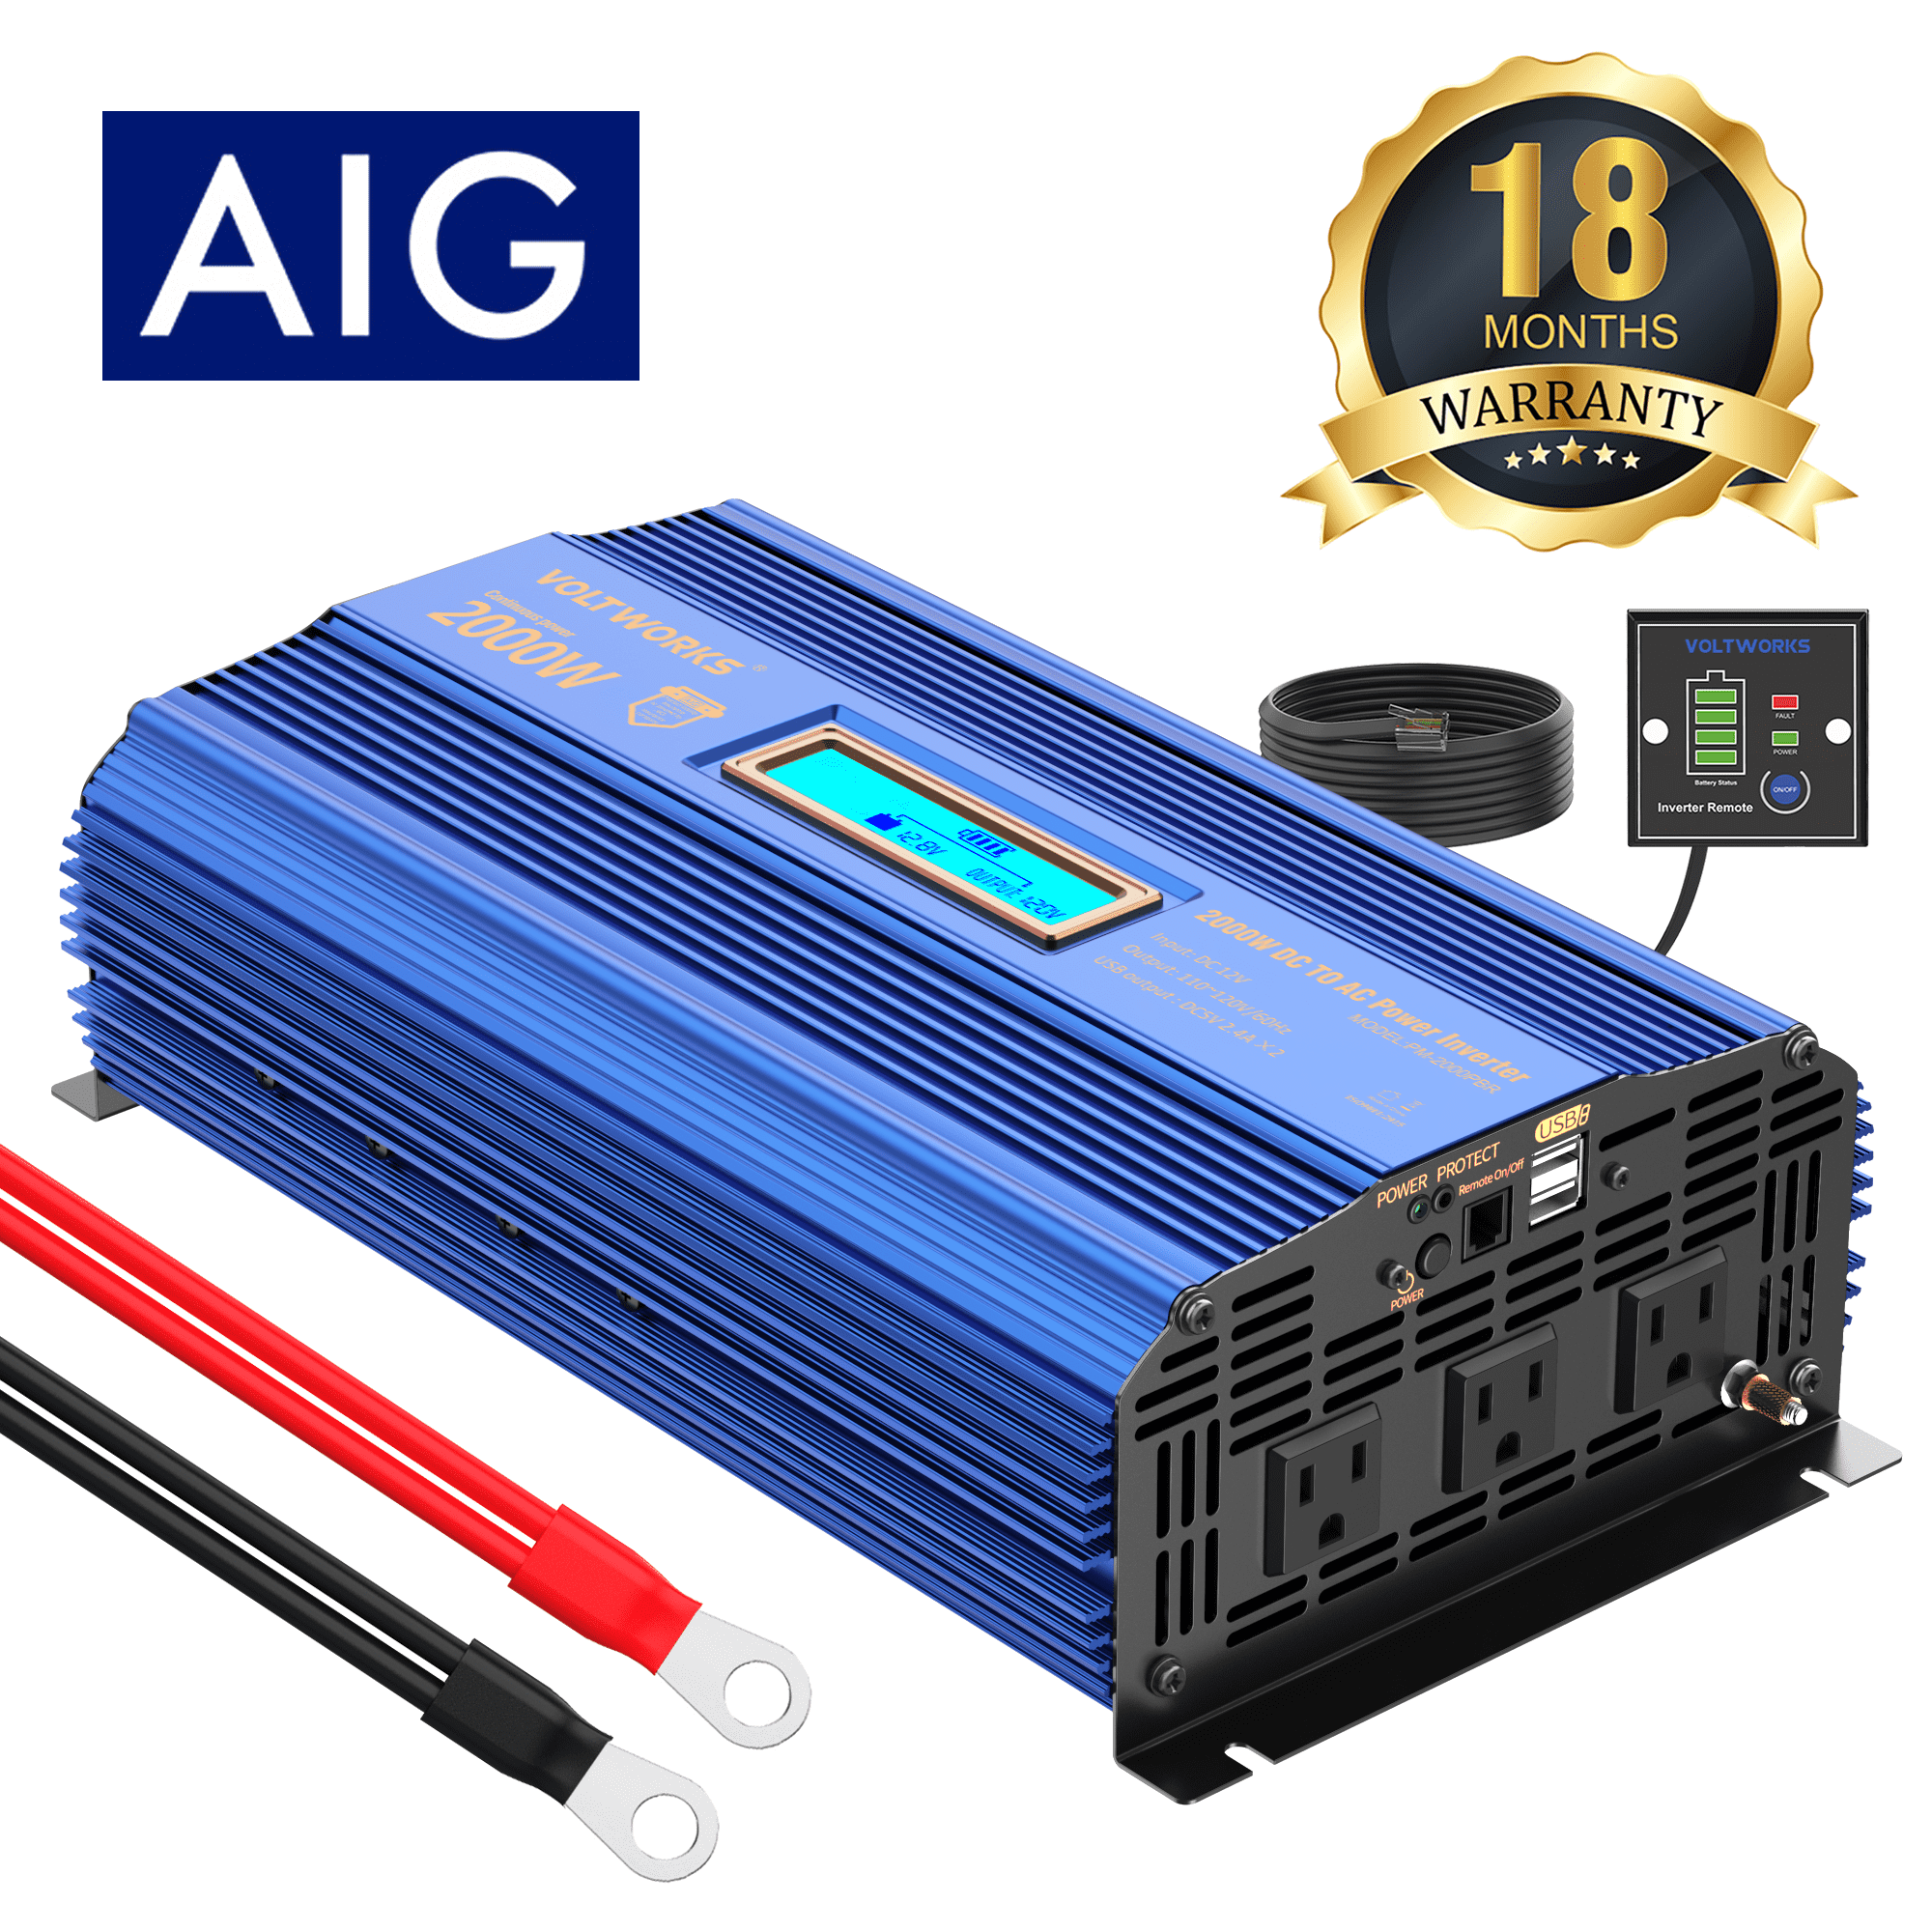 Power Inverter 300W Car Inverter DC 12V to 110V AC Converter with LED  Display & 2x2.4A Dual USB Car Adapter Charger by VOLTWORKS Blue